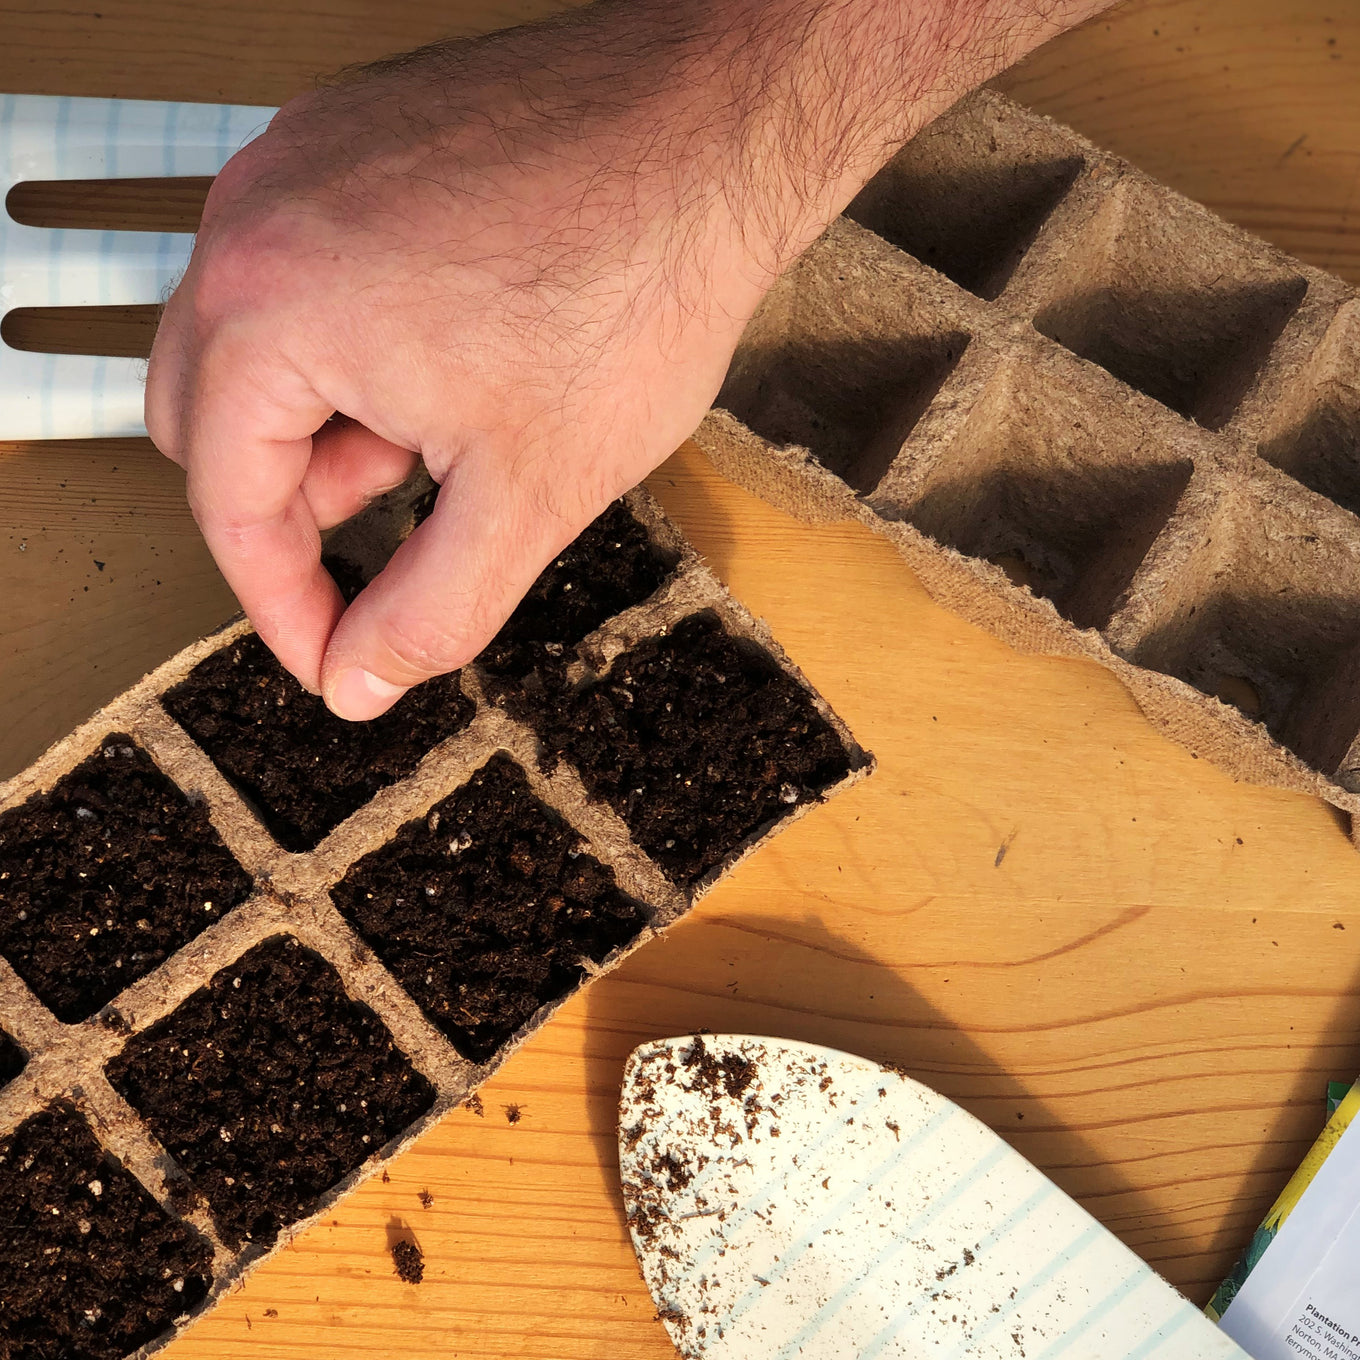 Sowing Slicer Cucumber Seeds into Jiffy seed starting peat strip trays filled with sowing medium.